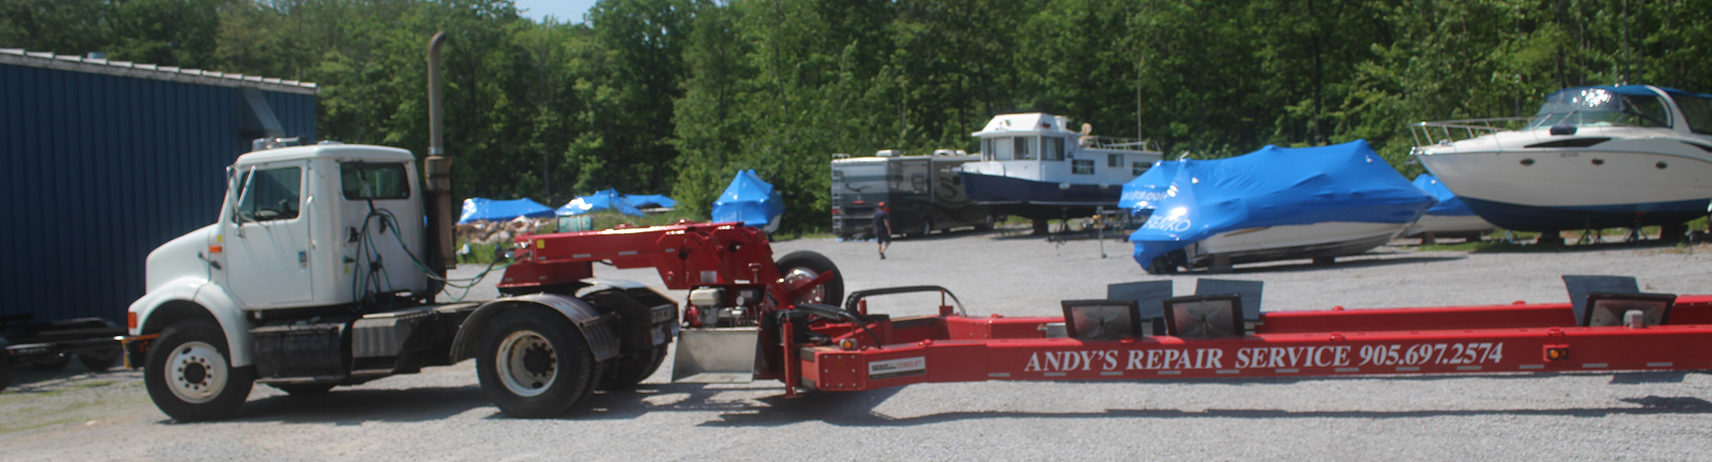 A photo of our boat tractor trailer, a white cab truck with a red trailer